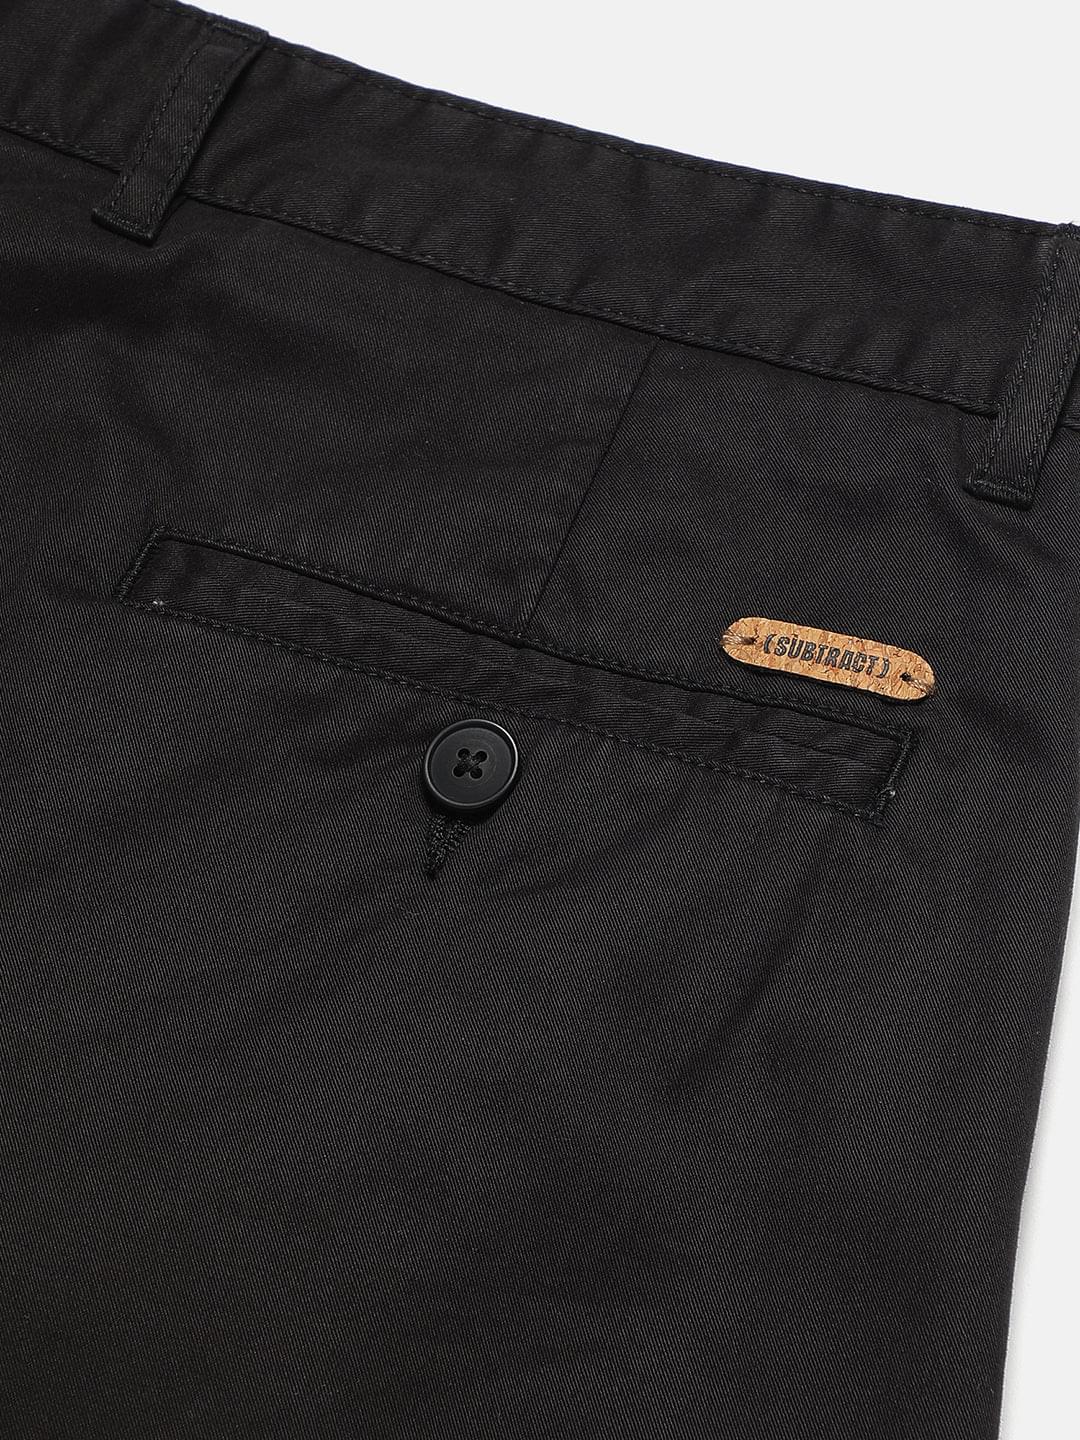 2 Way Stretch Pleated Chinos in Black- Comfort Fit